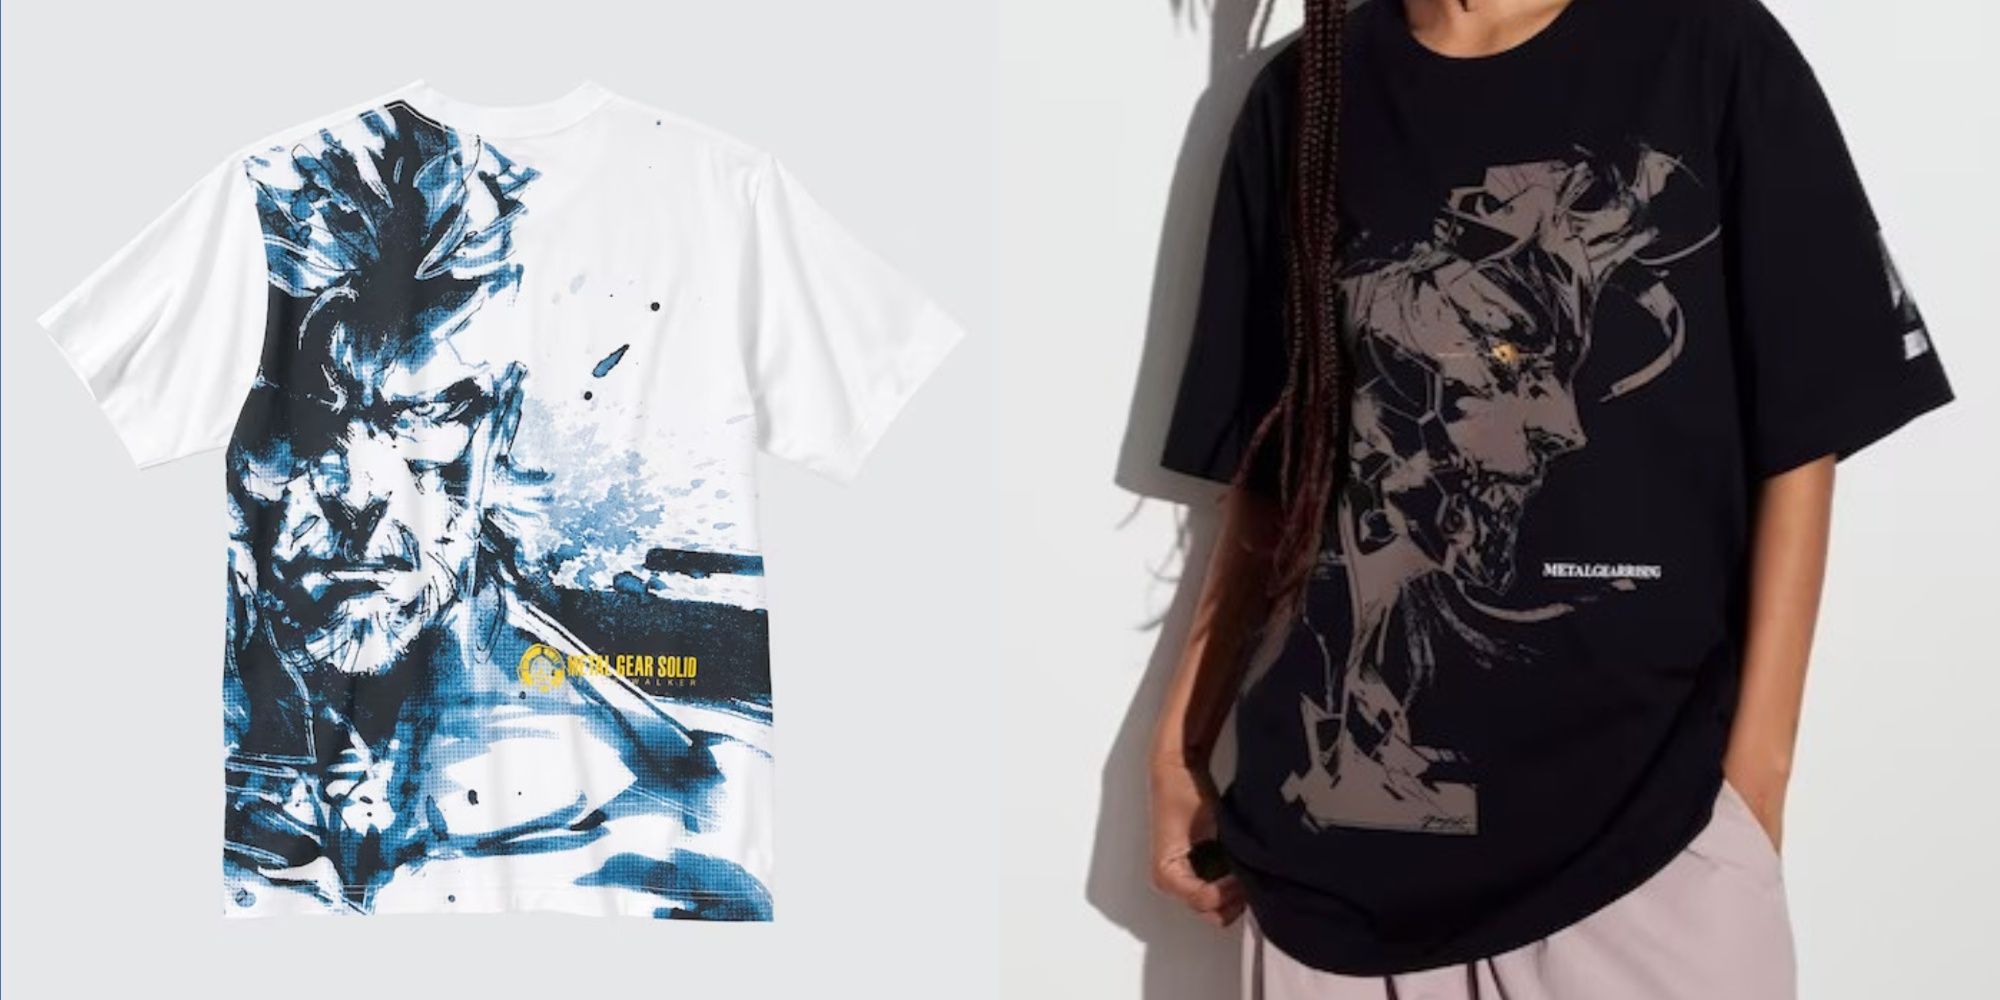 Metal Gear's Retired T-Shirt Collection Has Been Reissued, As Promised